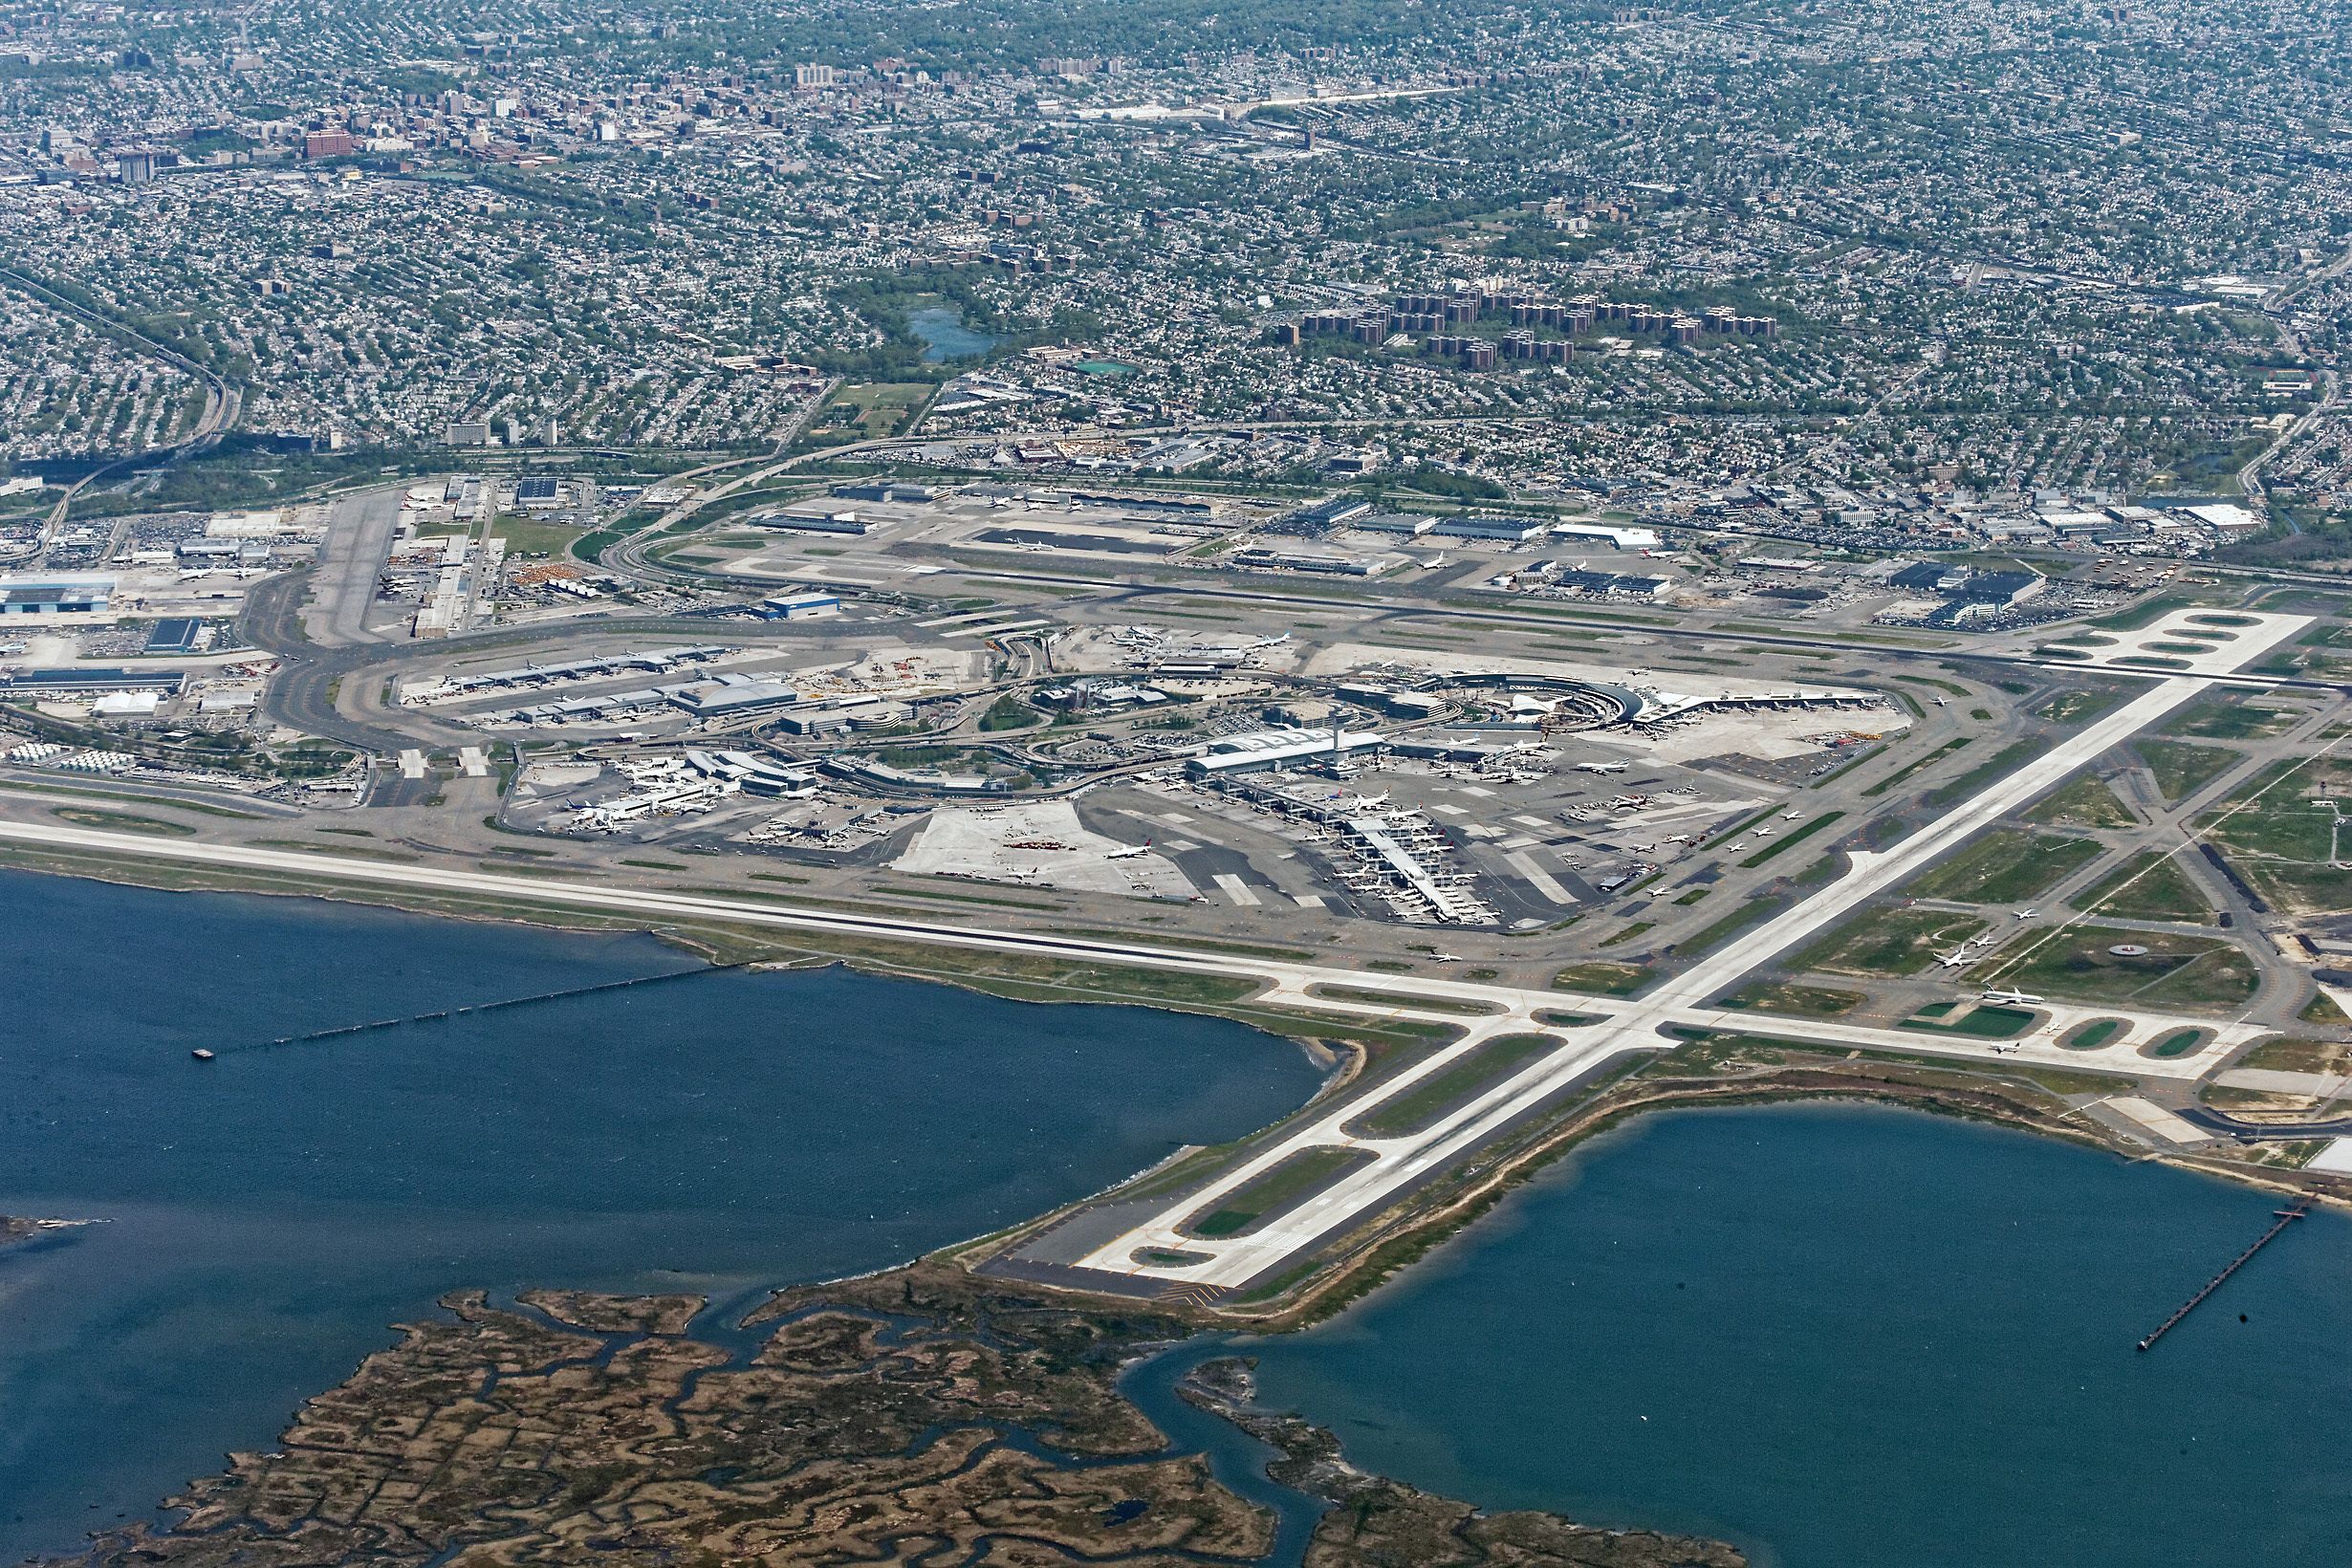 An Aerial view of New York-JFK Airport.